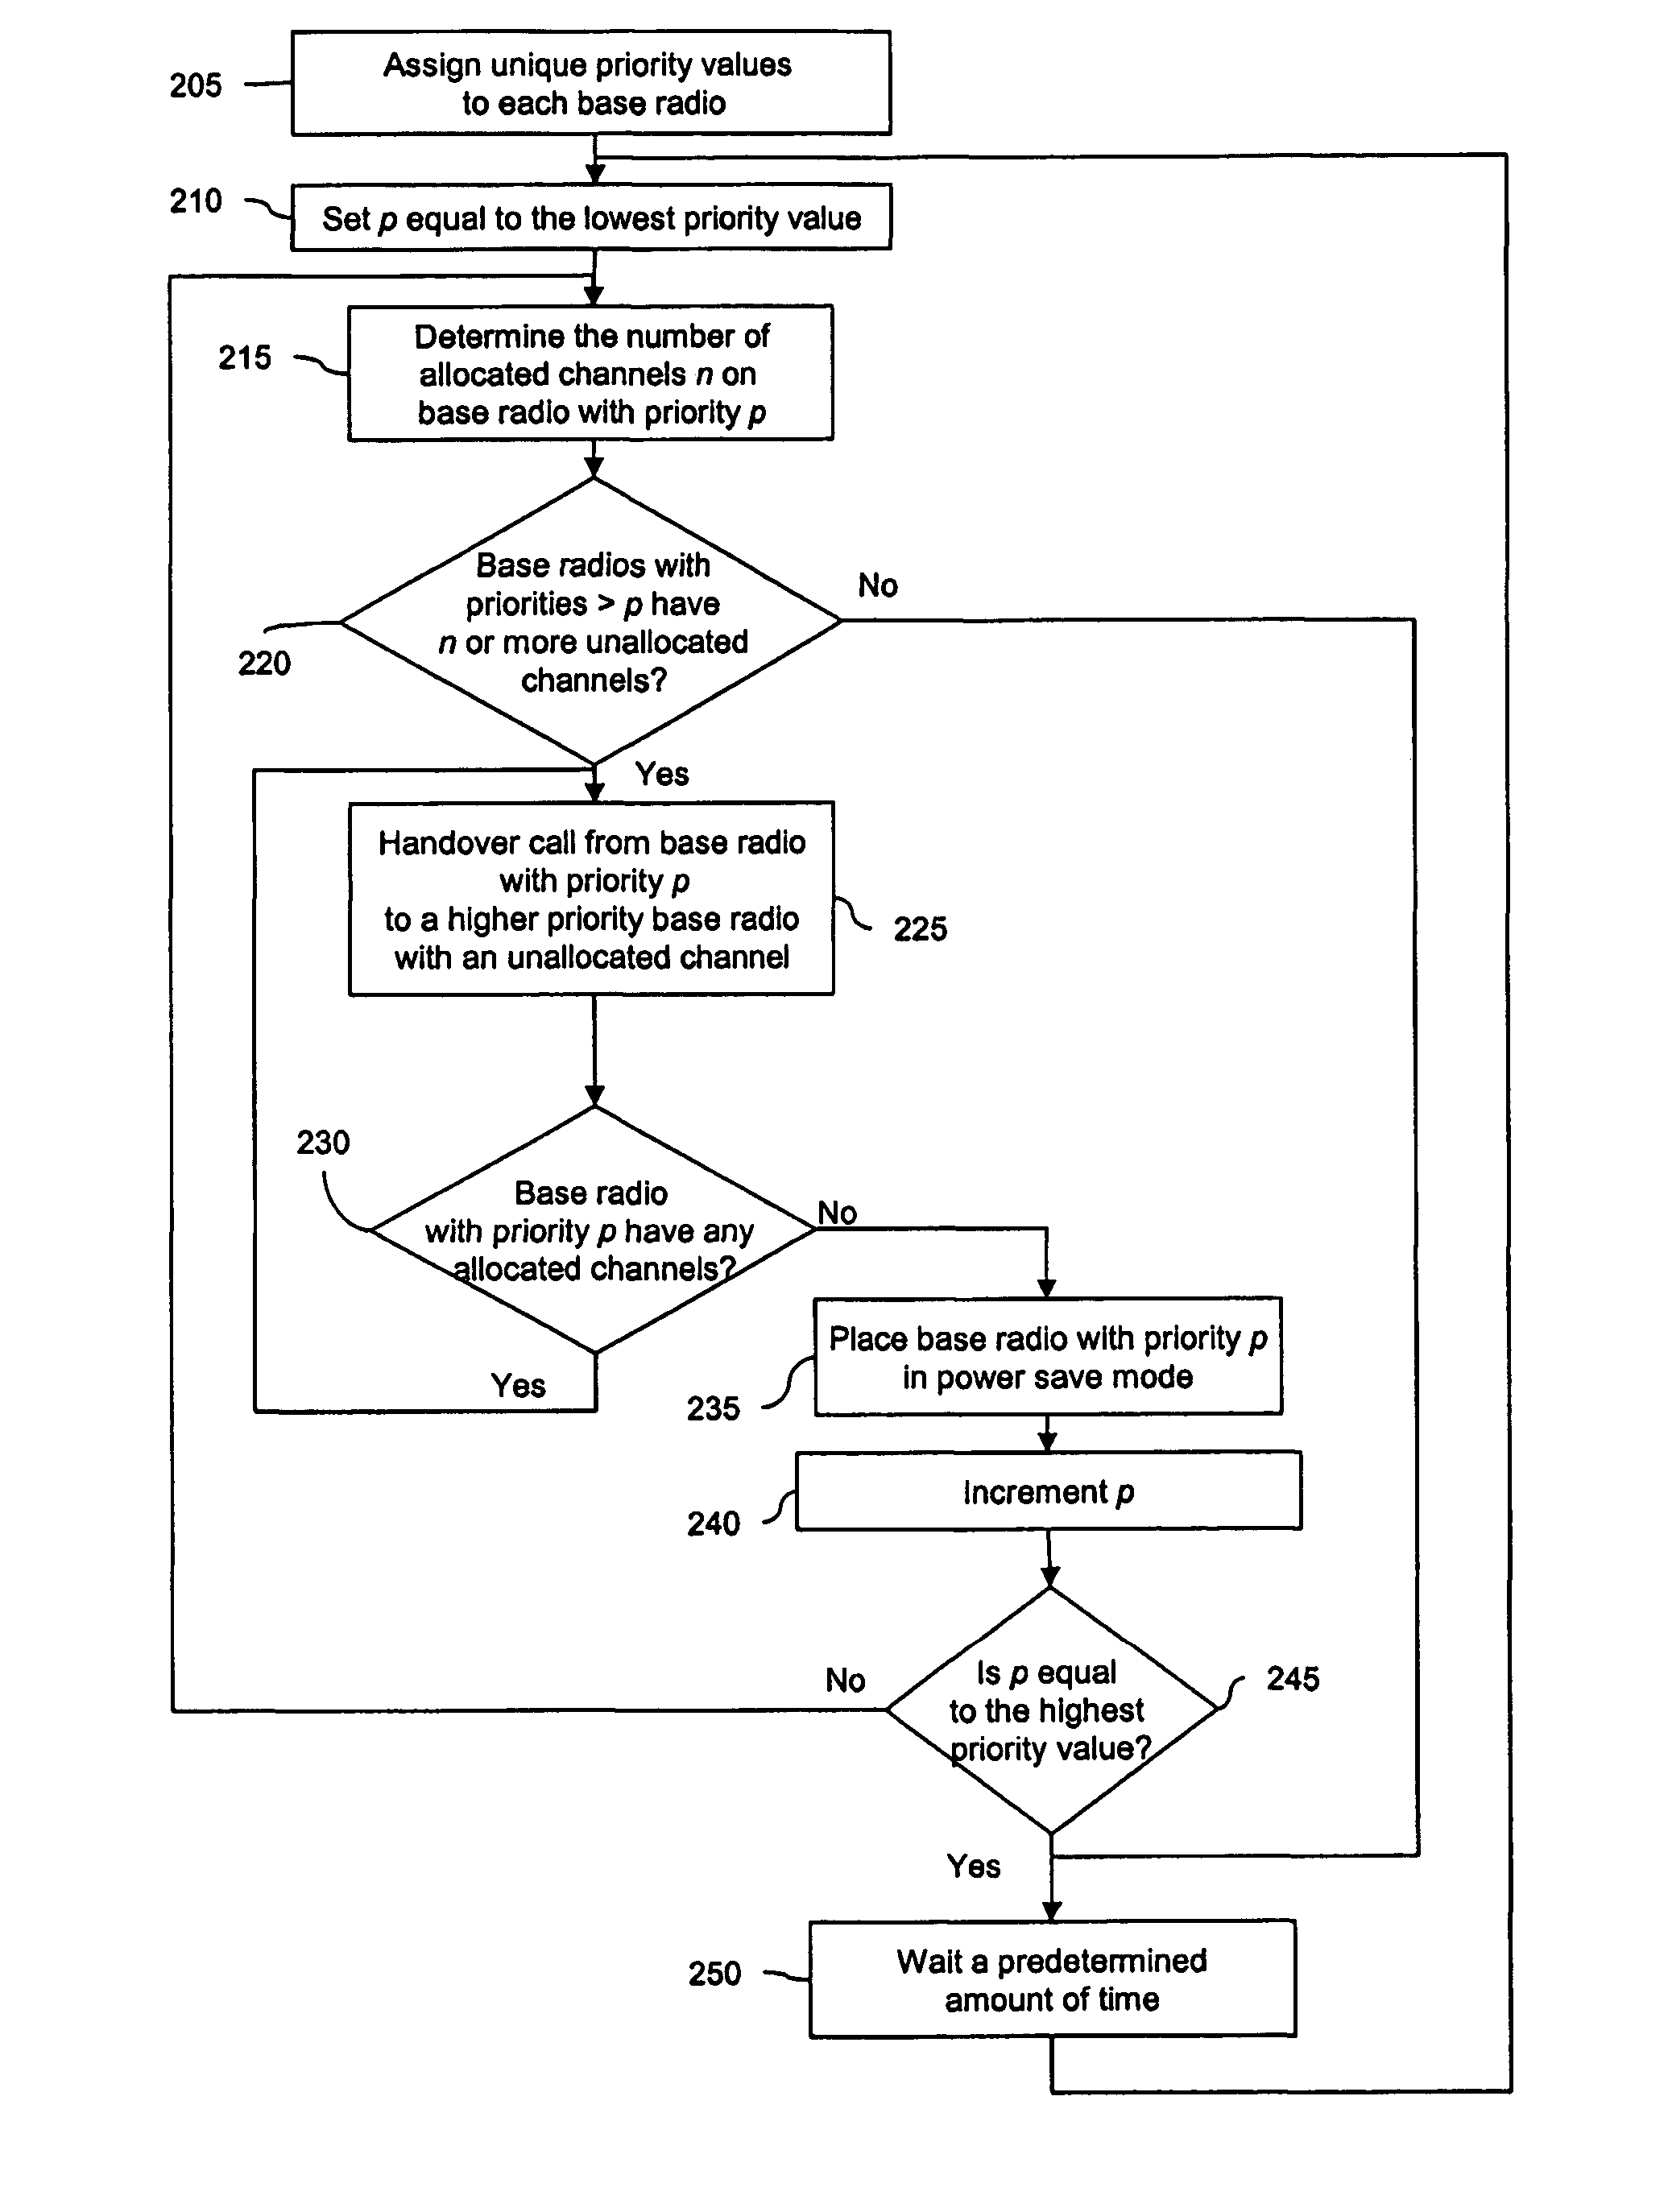 Systems and methods for handovers between base radios